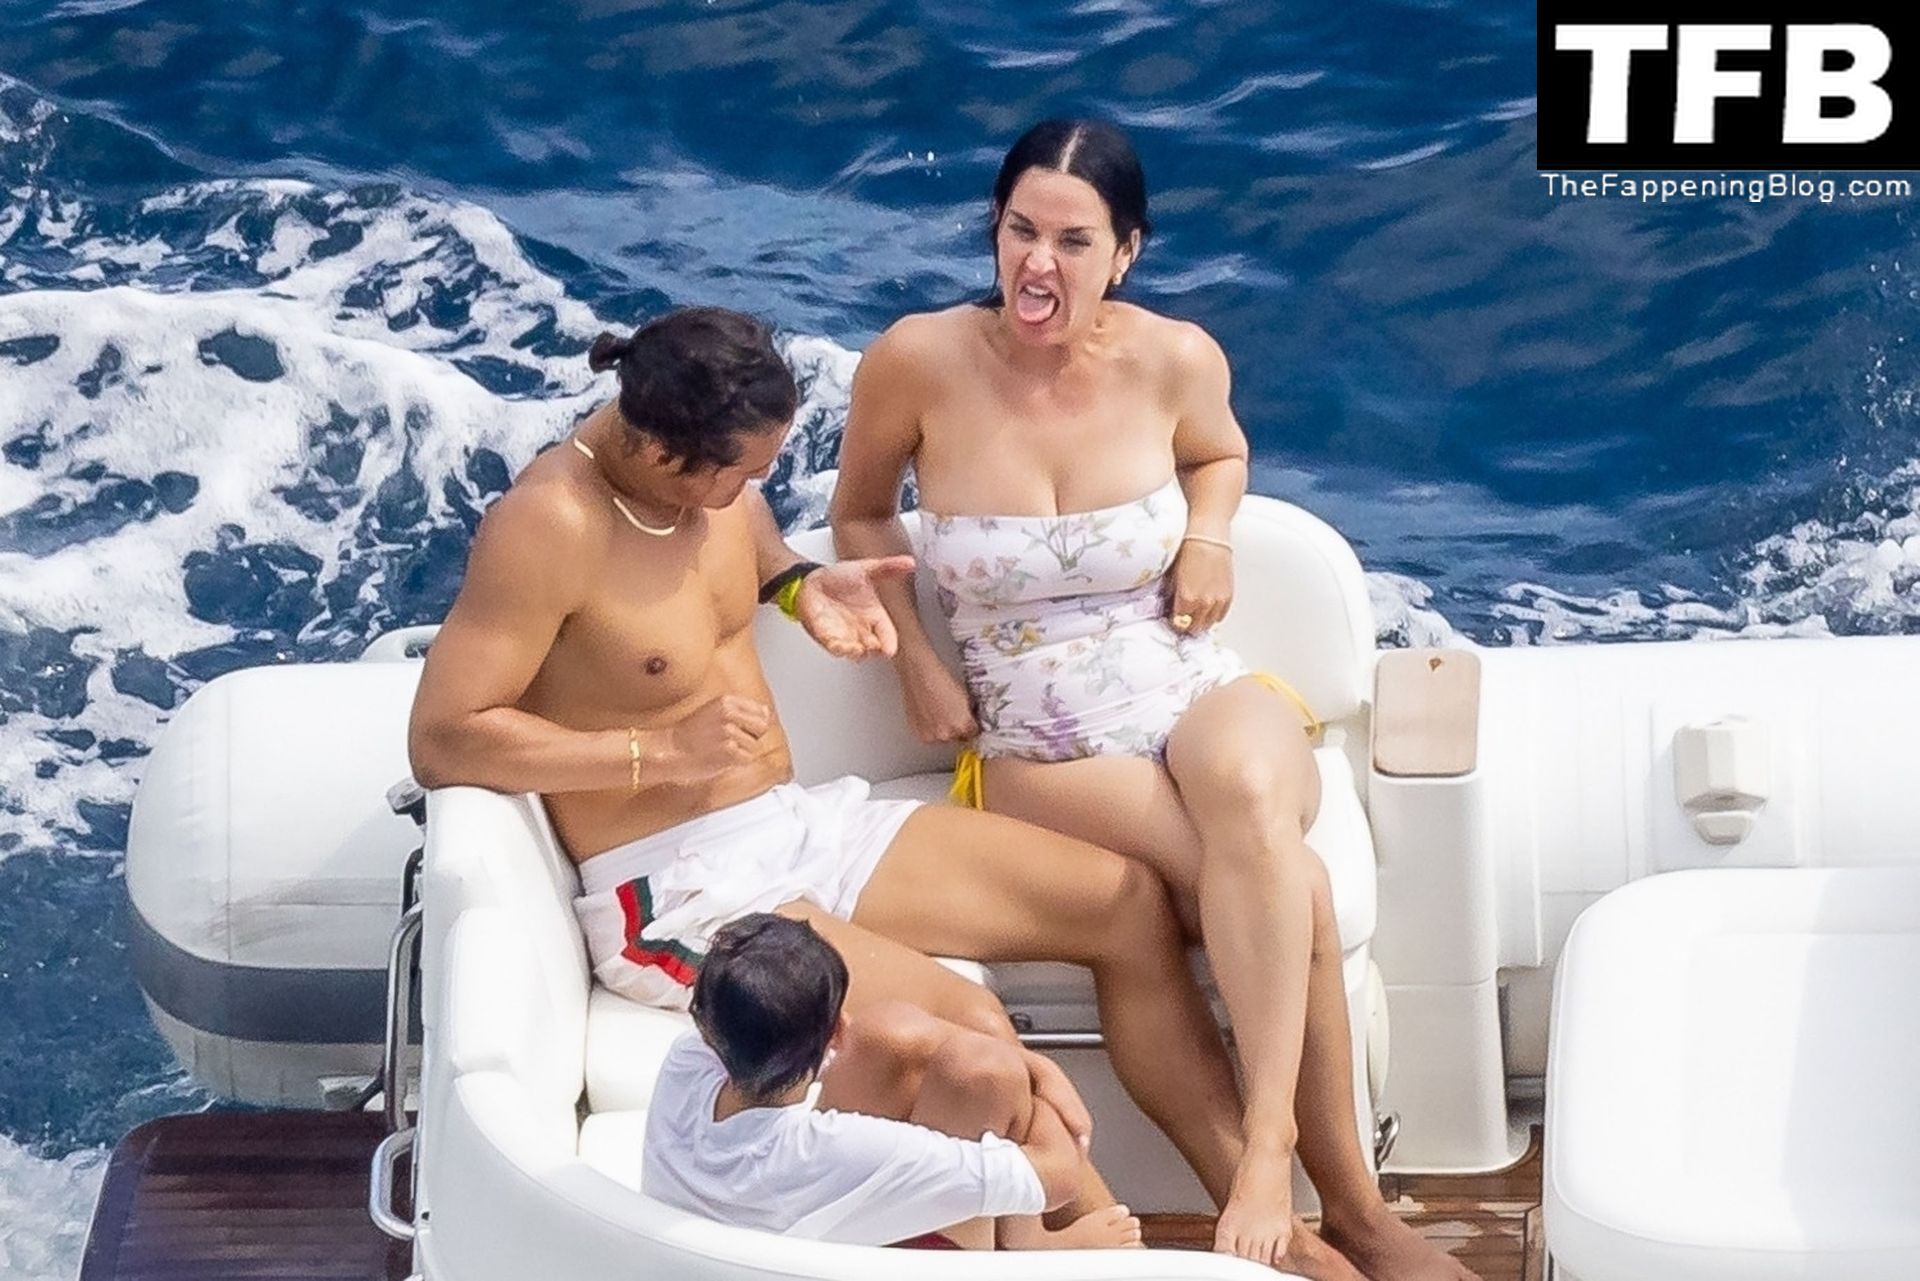 Katy Perry Sexy The Fappening Blog 5 - Katy Perry Rocks a Strapless Swimsuit While Enjoying a Beach Day with Orlando Bloom in Positano (105 Photos)